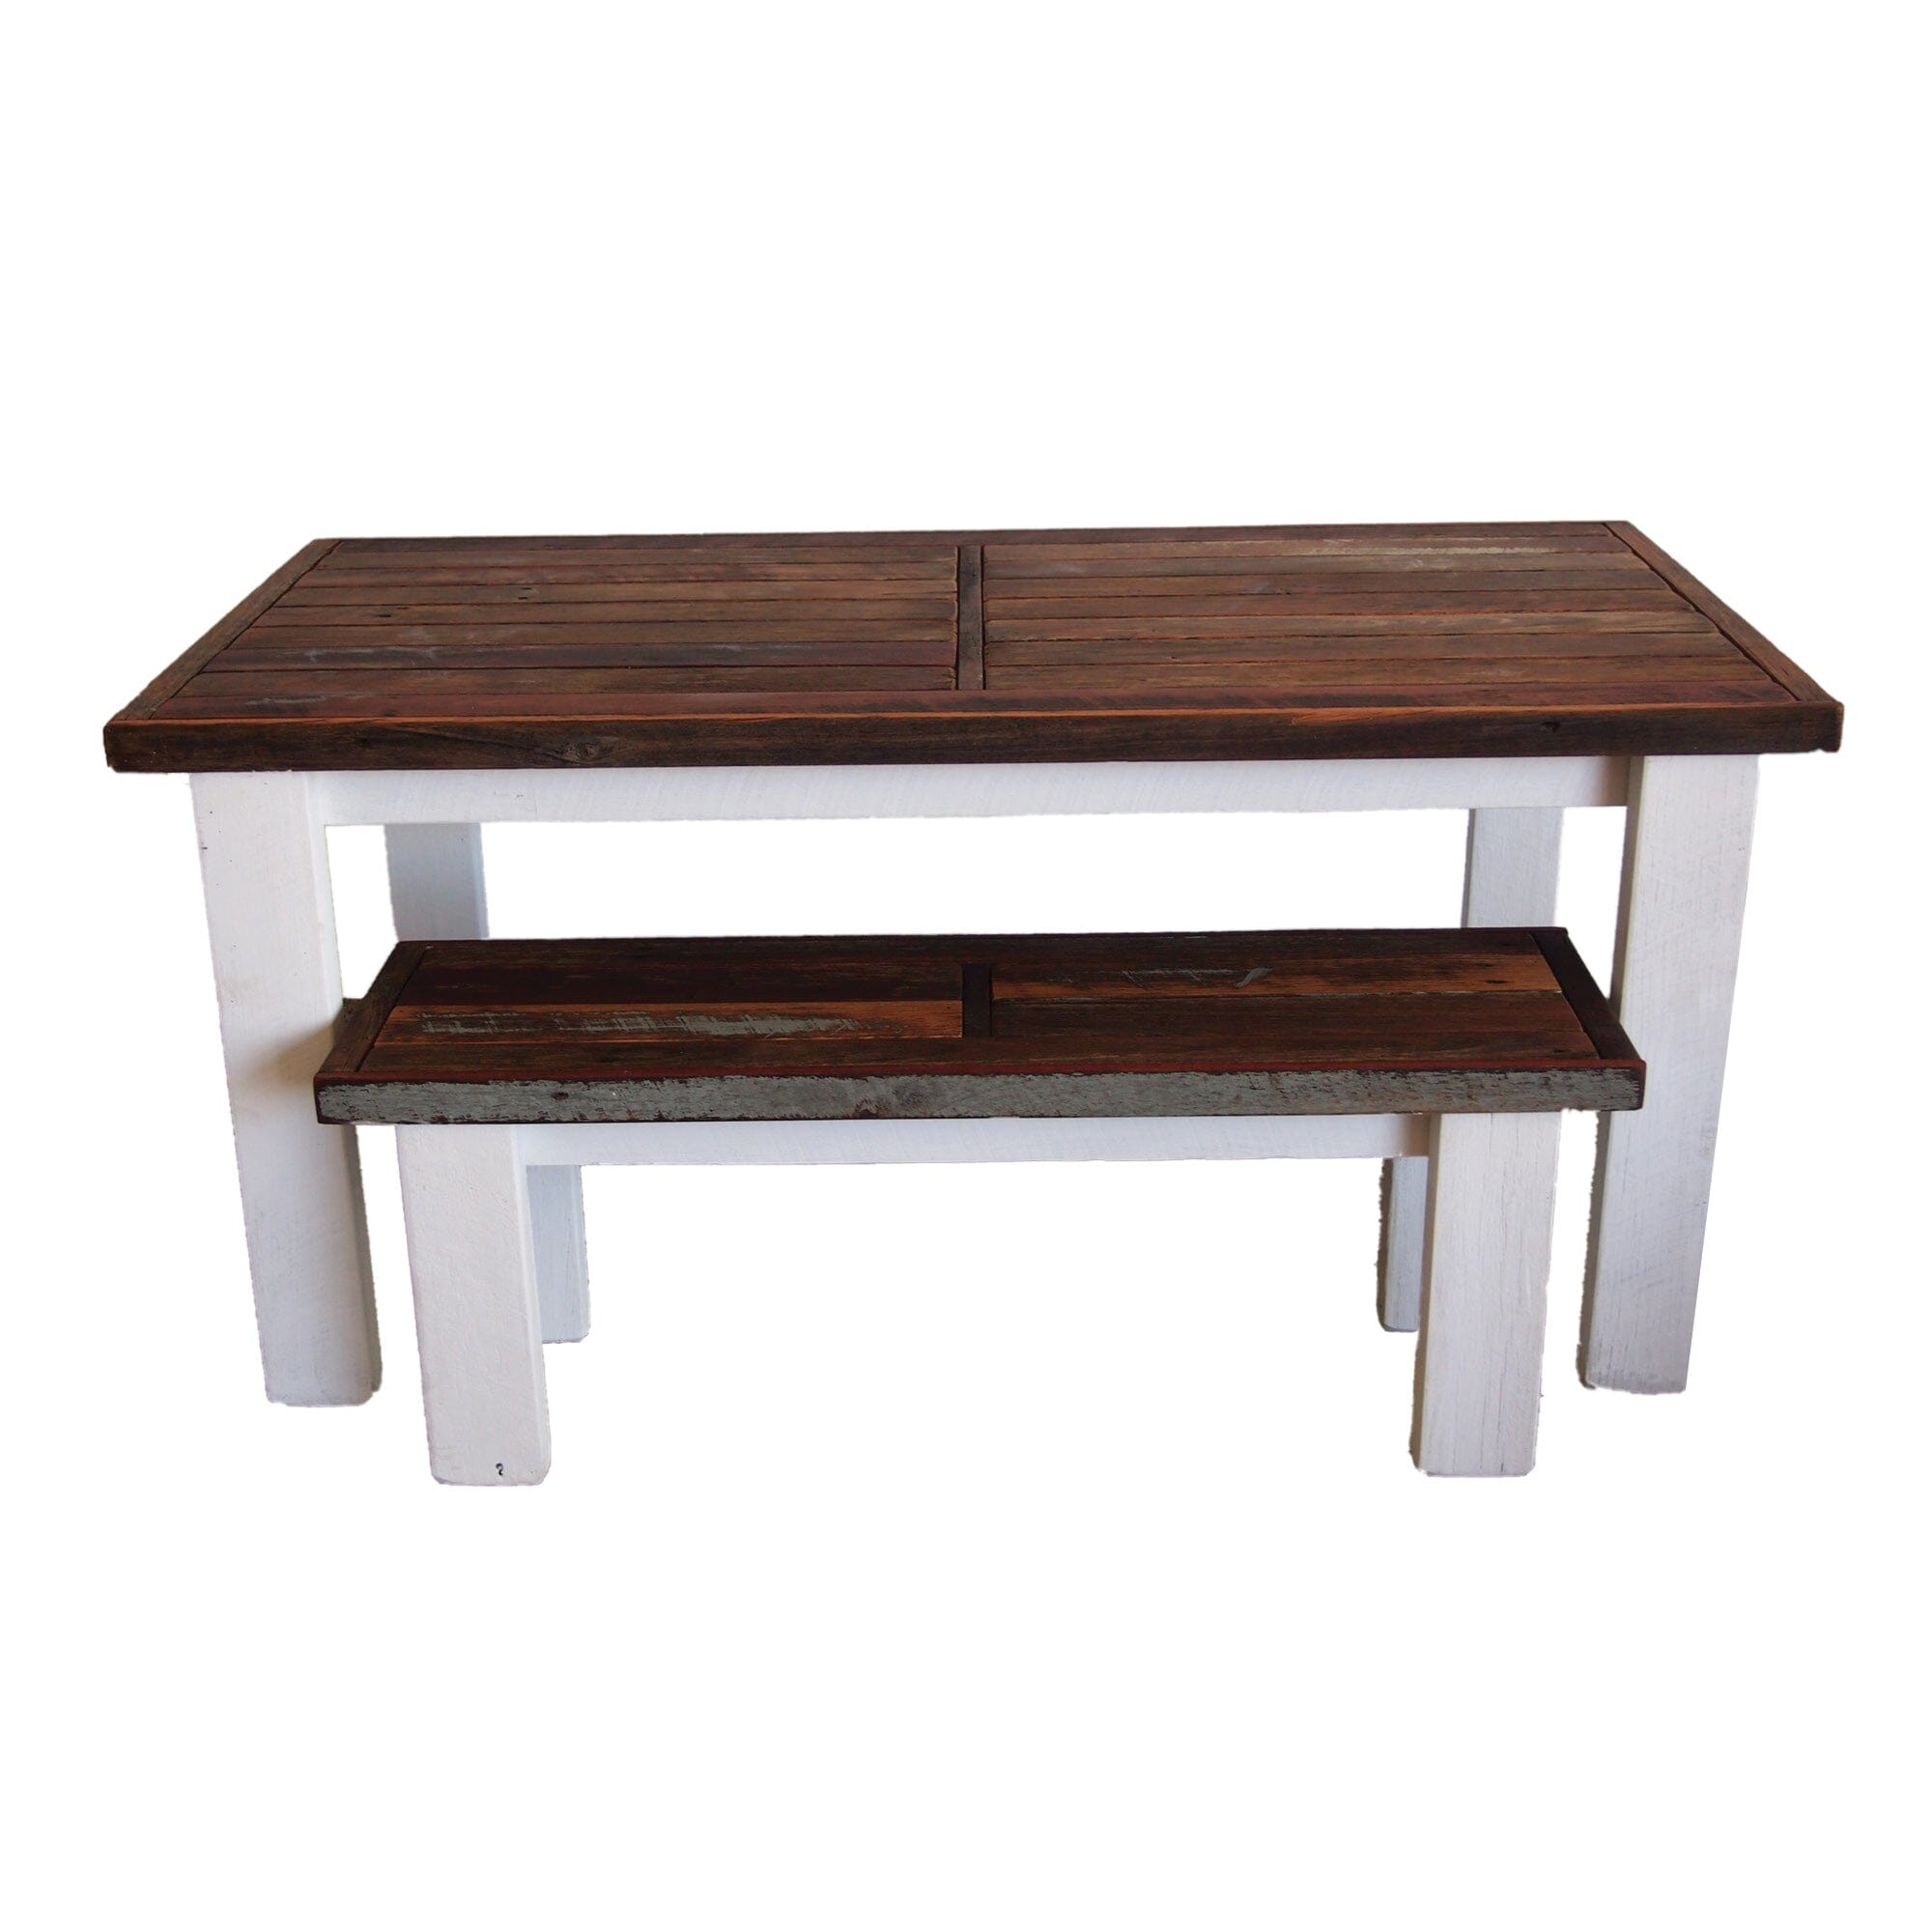 Local Handmade Outdoor Table L2100mm Outdoor Furniture Beachwood Designs 